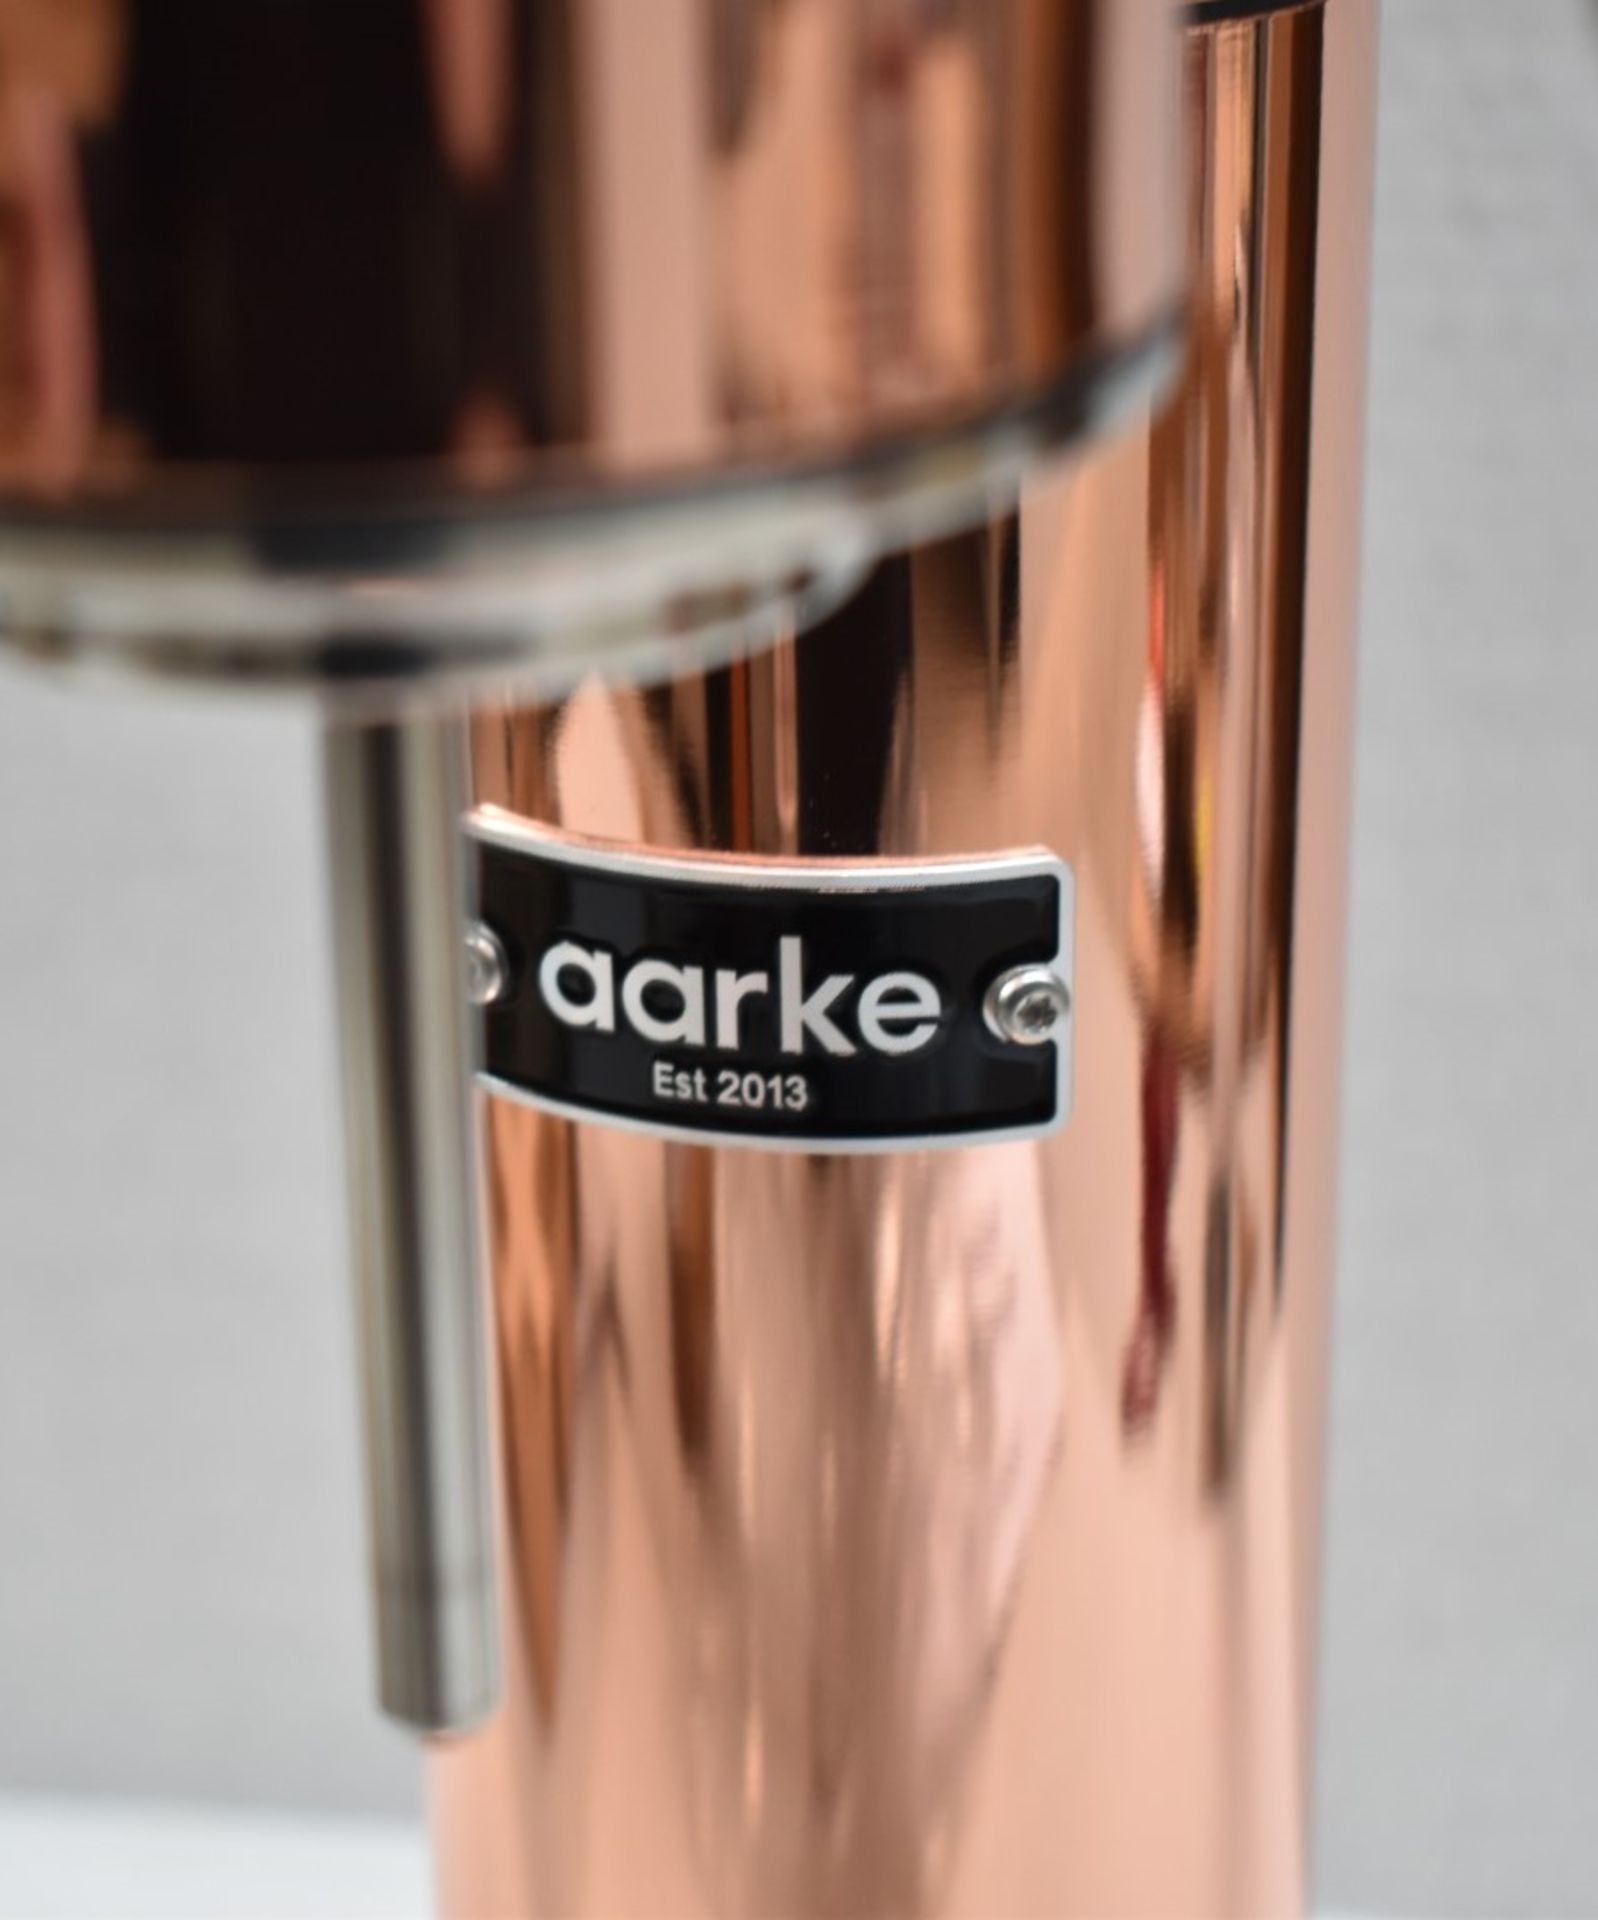 1 x AARKE Carbonator 3 With a Copper Finish - Original Price £179.00 - Unused Boxed Stock - Image 7 of 15